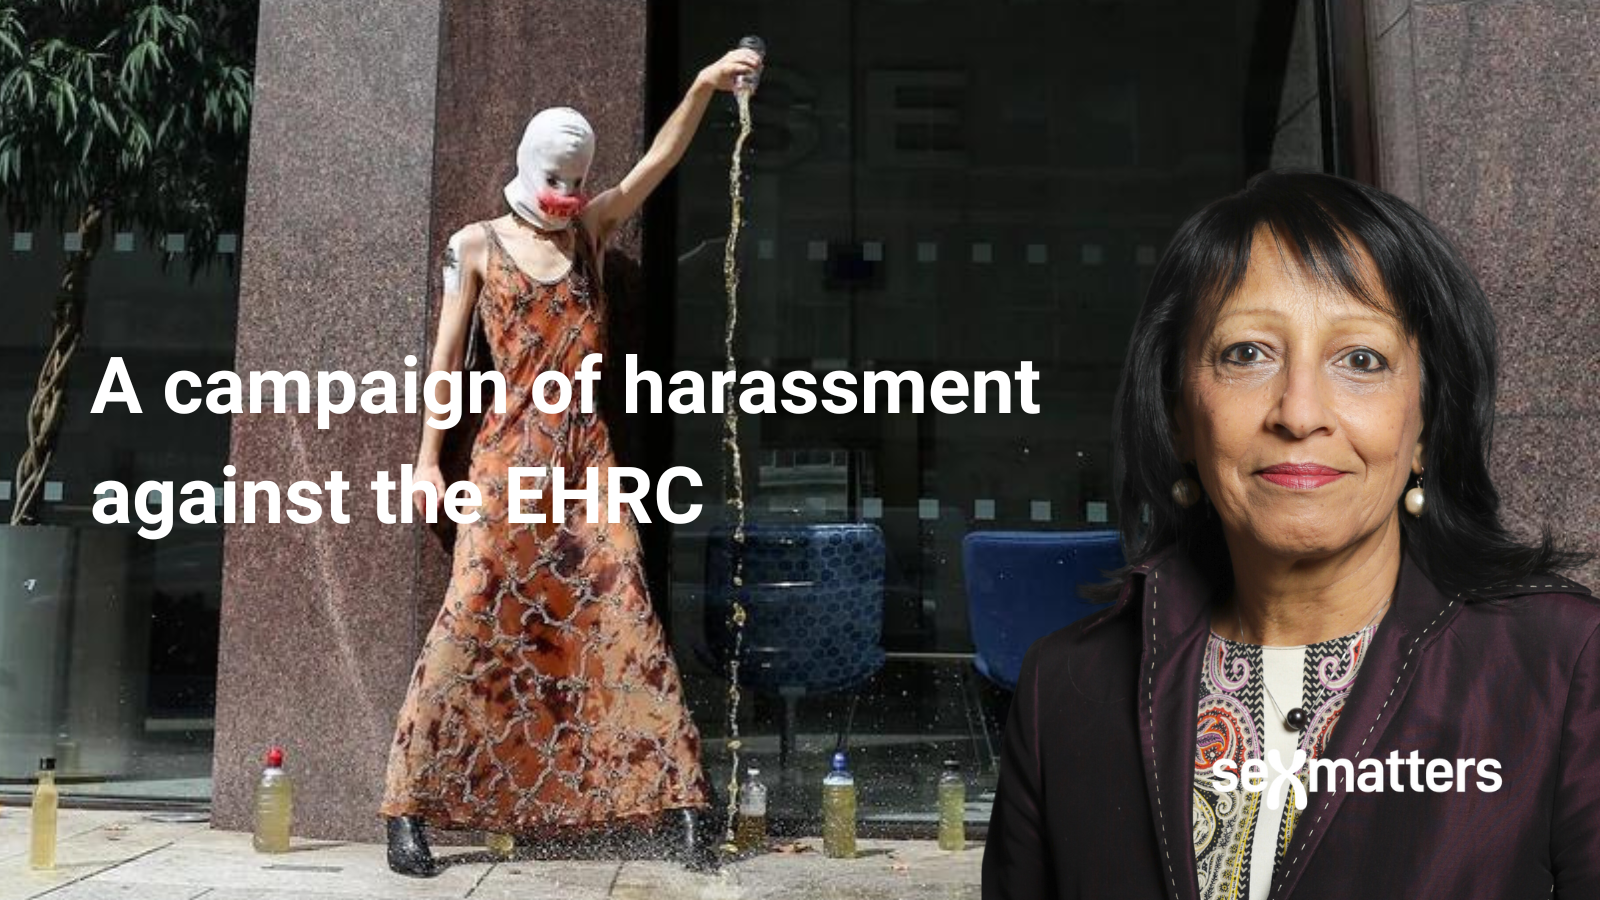 A campaign of harassment against the EHRC